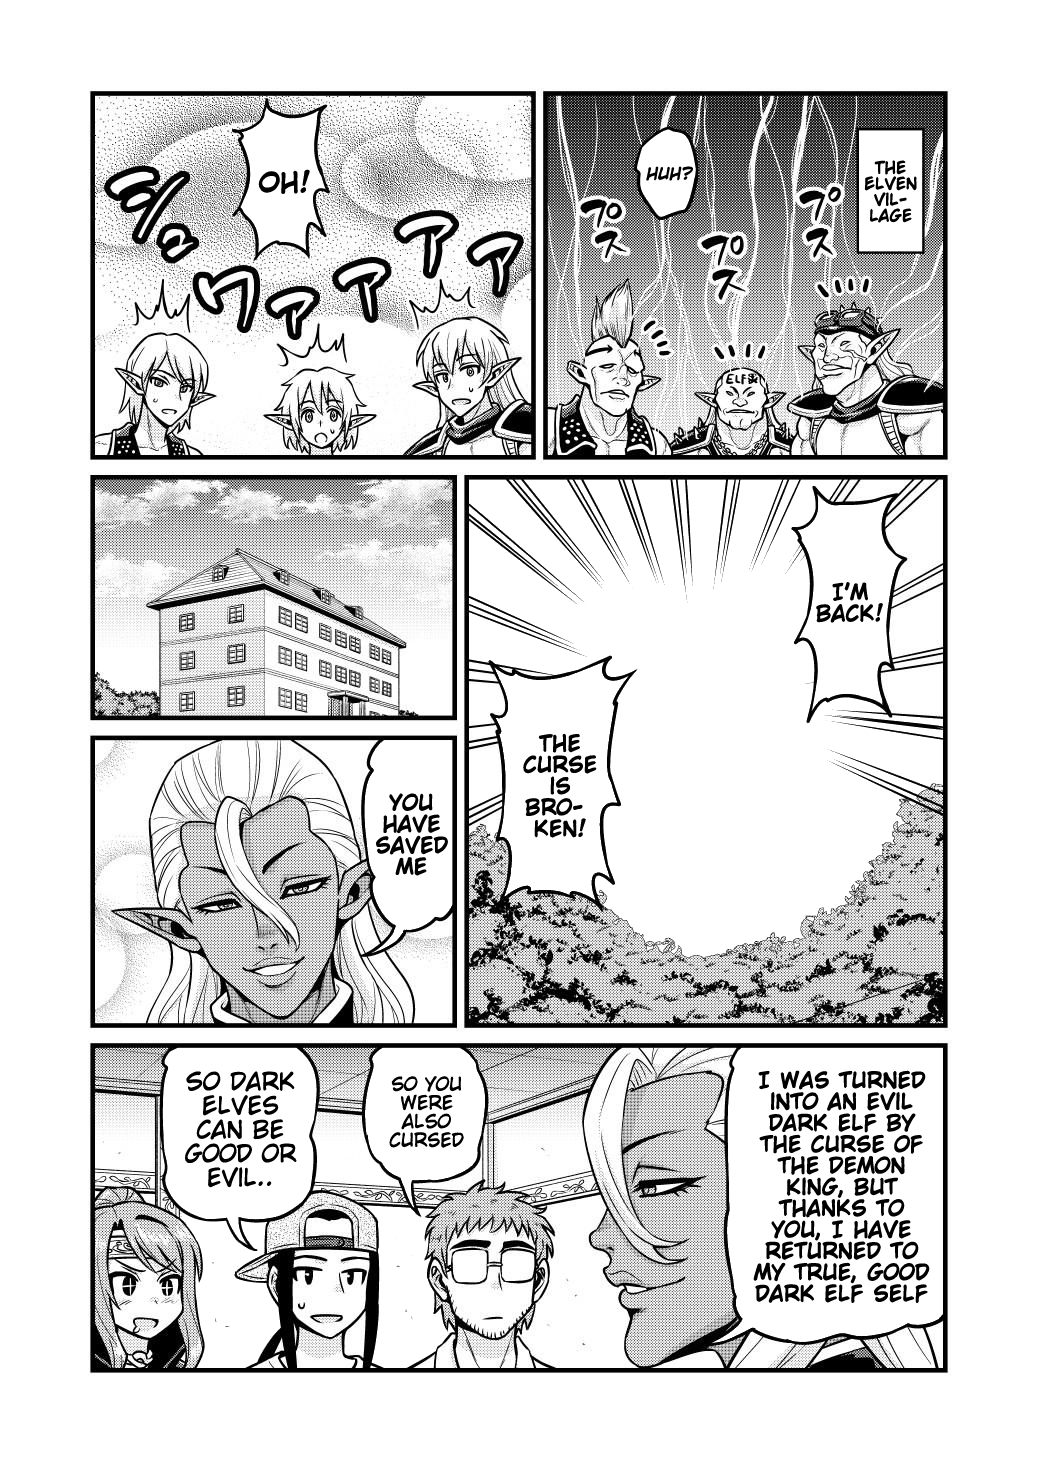 Filming Adult Videos in Another World - Chapter 3 Page 28